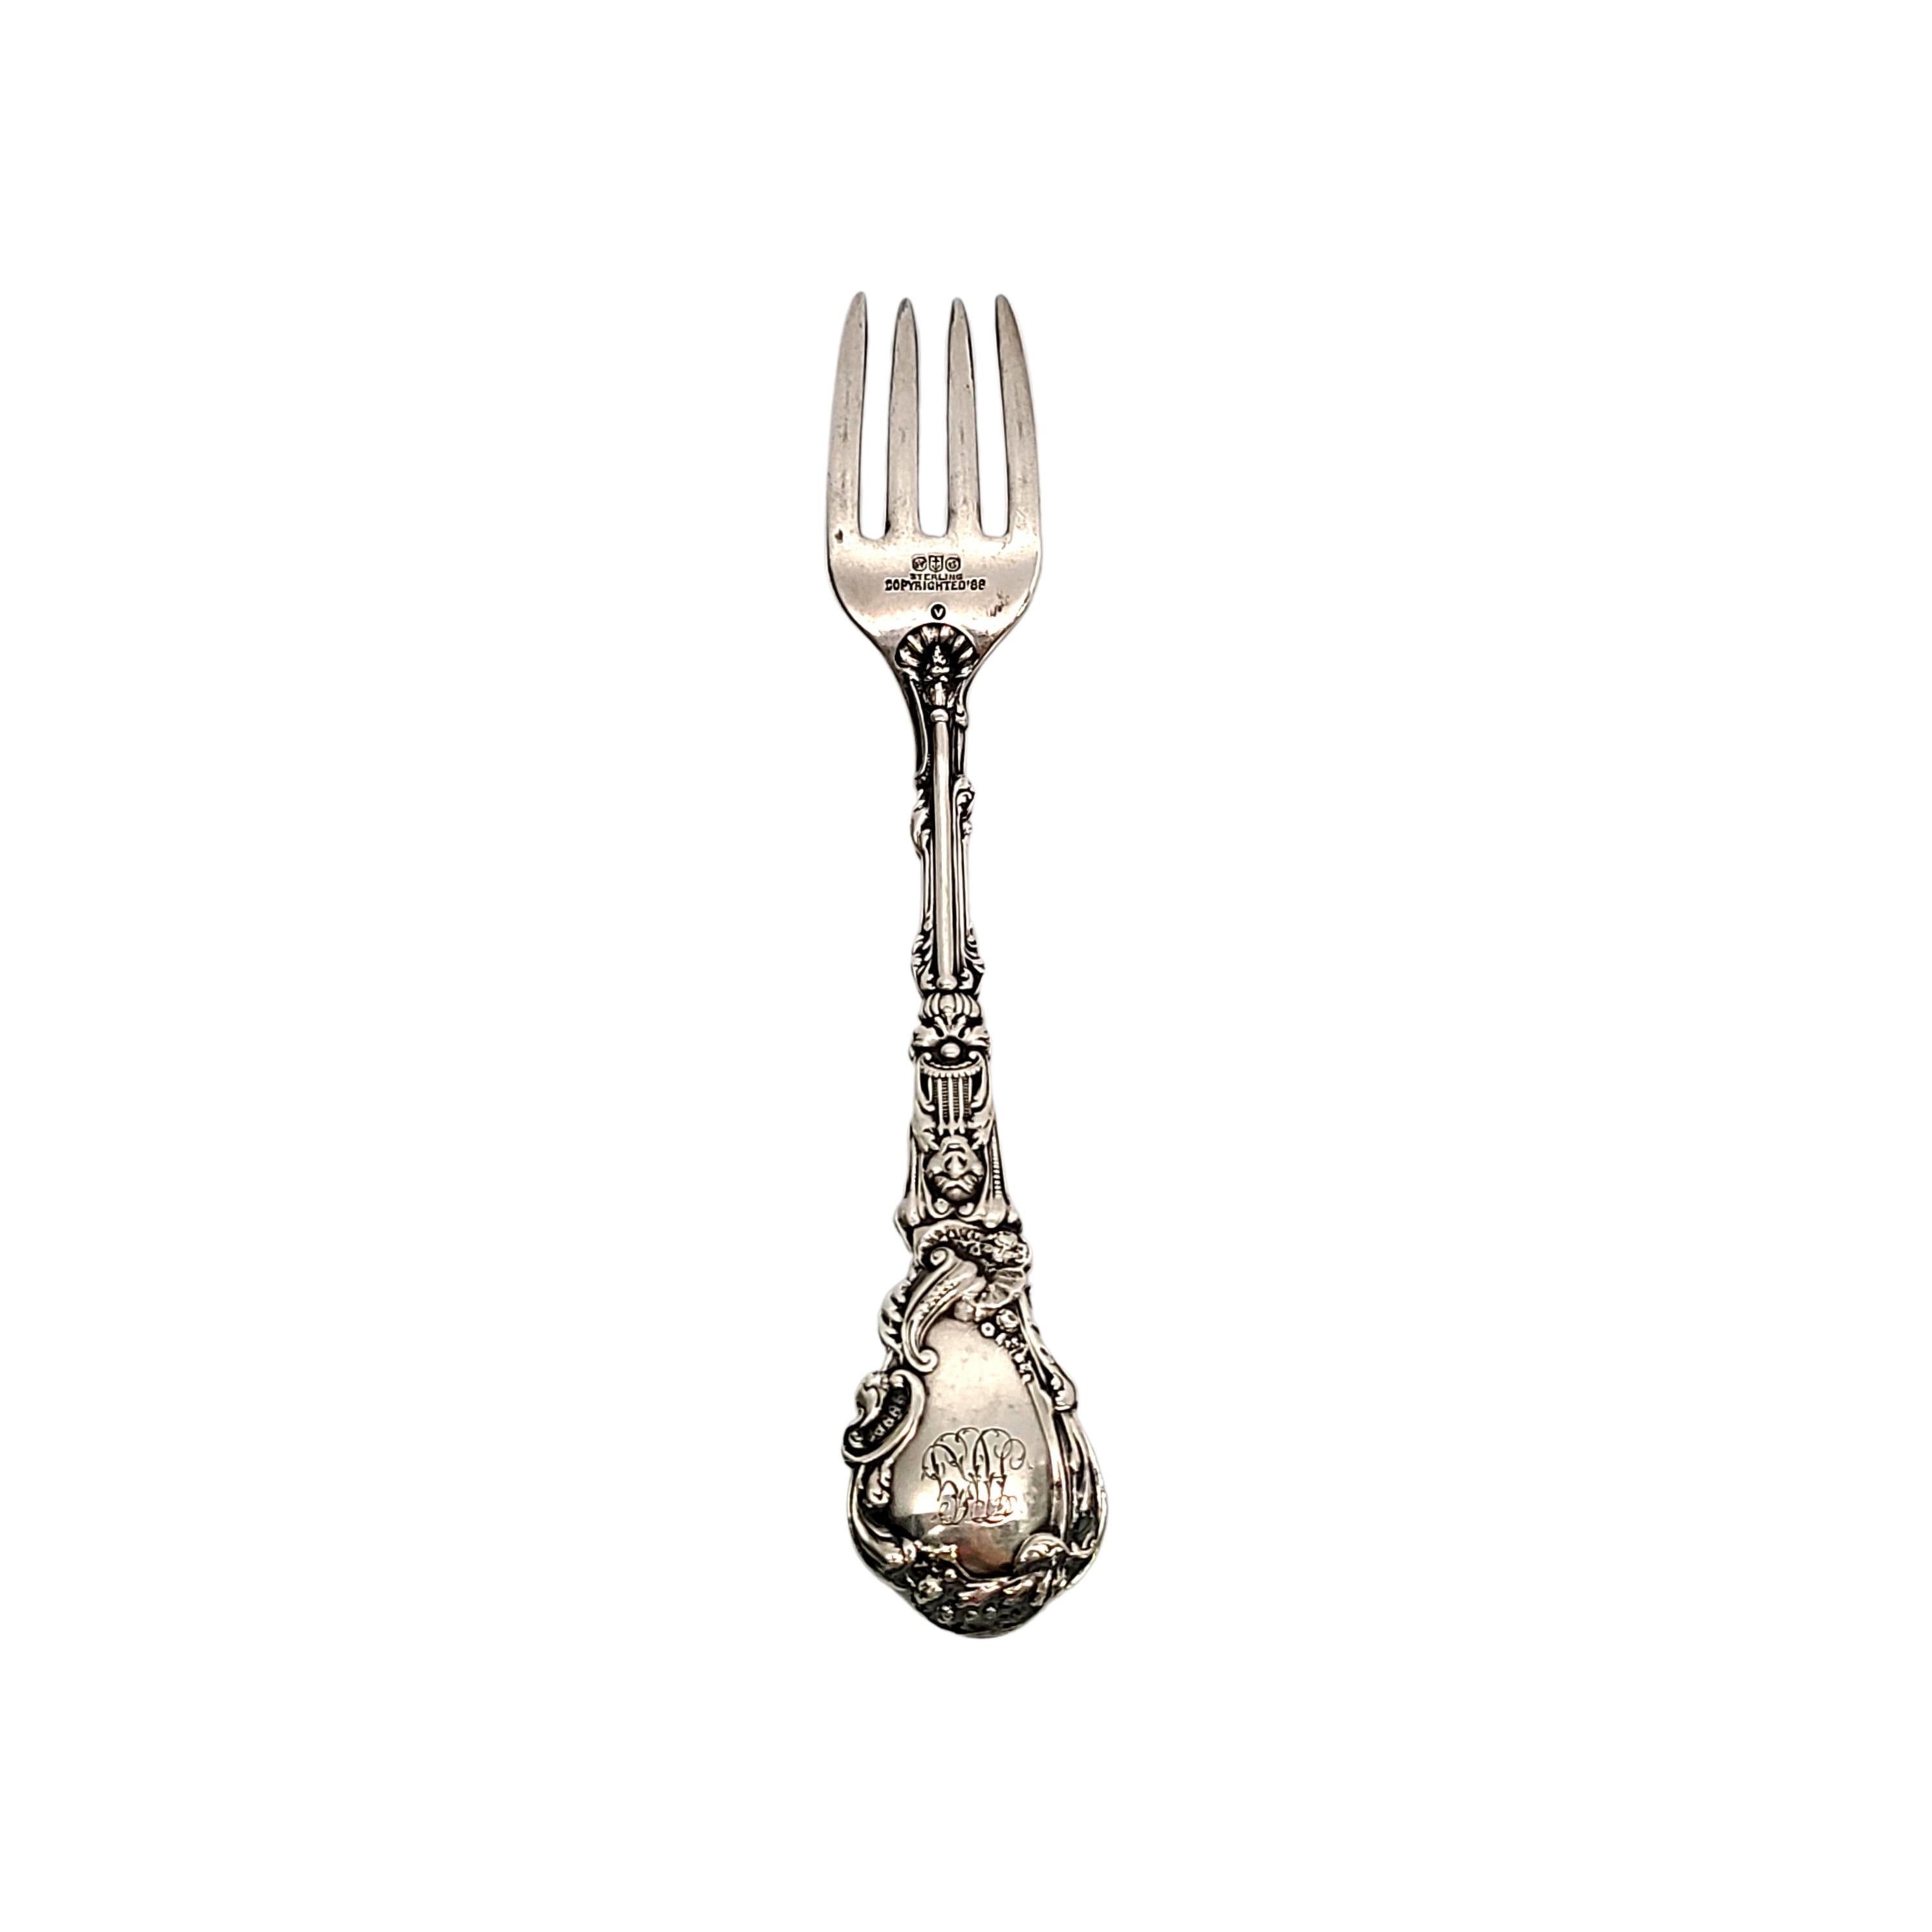 Antique sterling silver luncheon fork by Gorham in the Versailles pattern.

Monogram on the top back of each handle appears to be HJG

Gorham's Versailles is a multi motif pattern designed by Antone Heller in 1885. Named for the Palace of